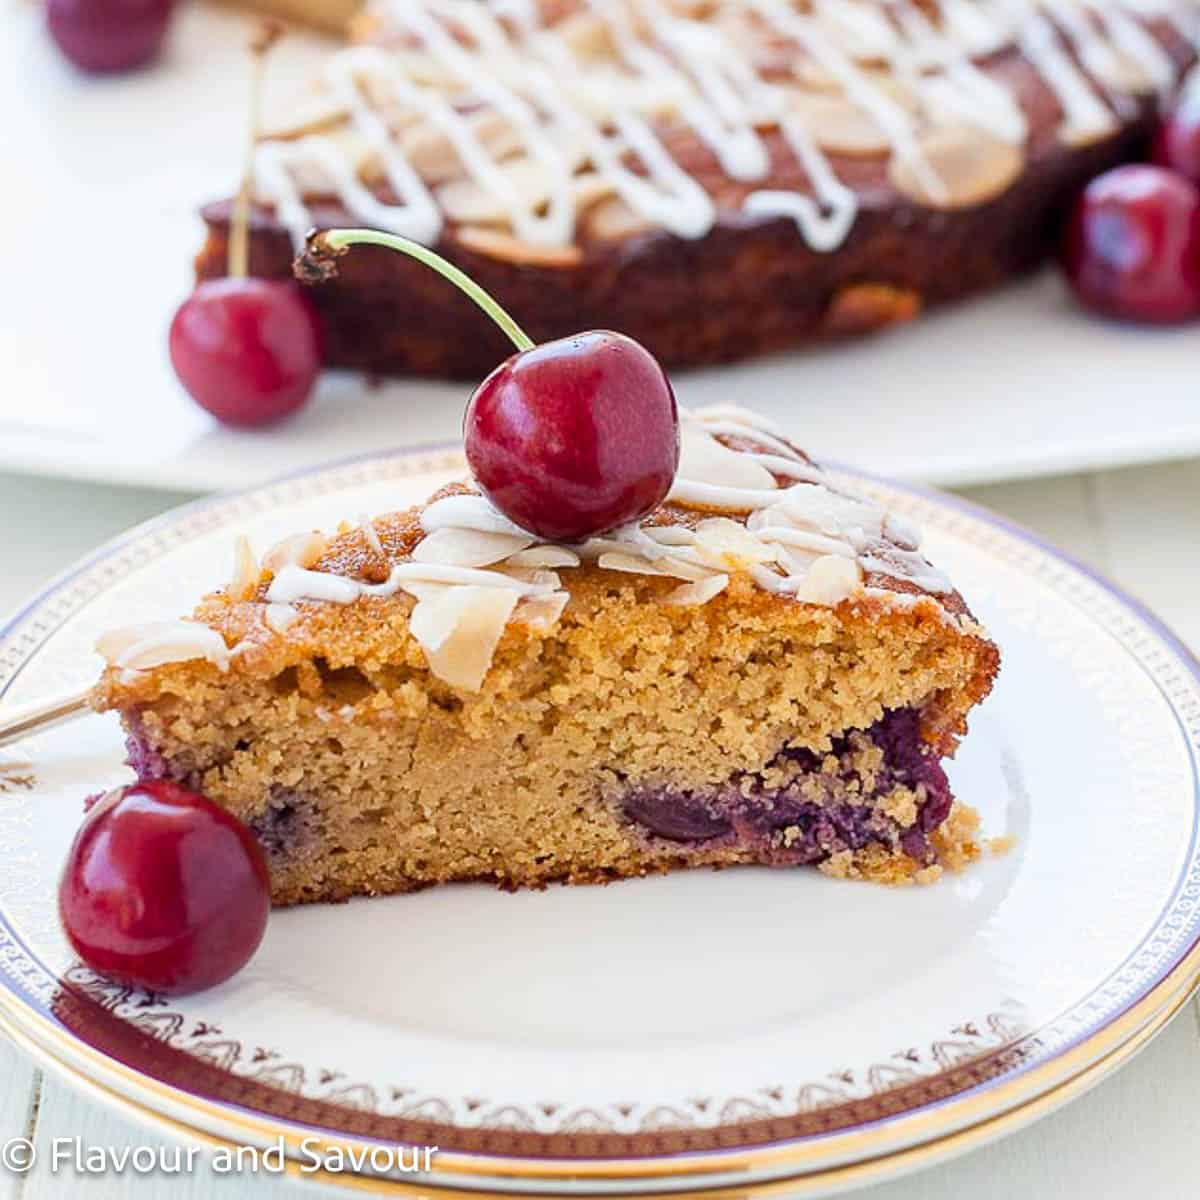 A slice of gluten-free cherry almond ricotta cake with a fresh cherry on top.